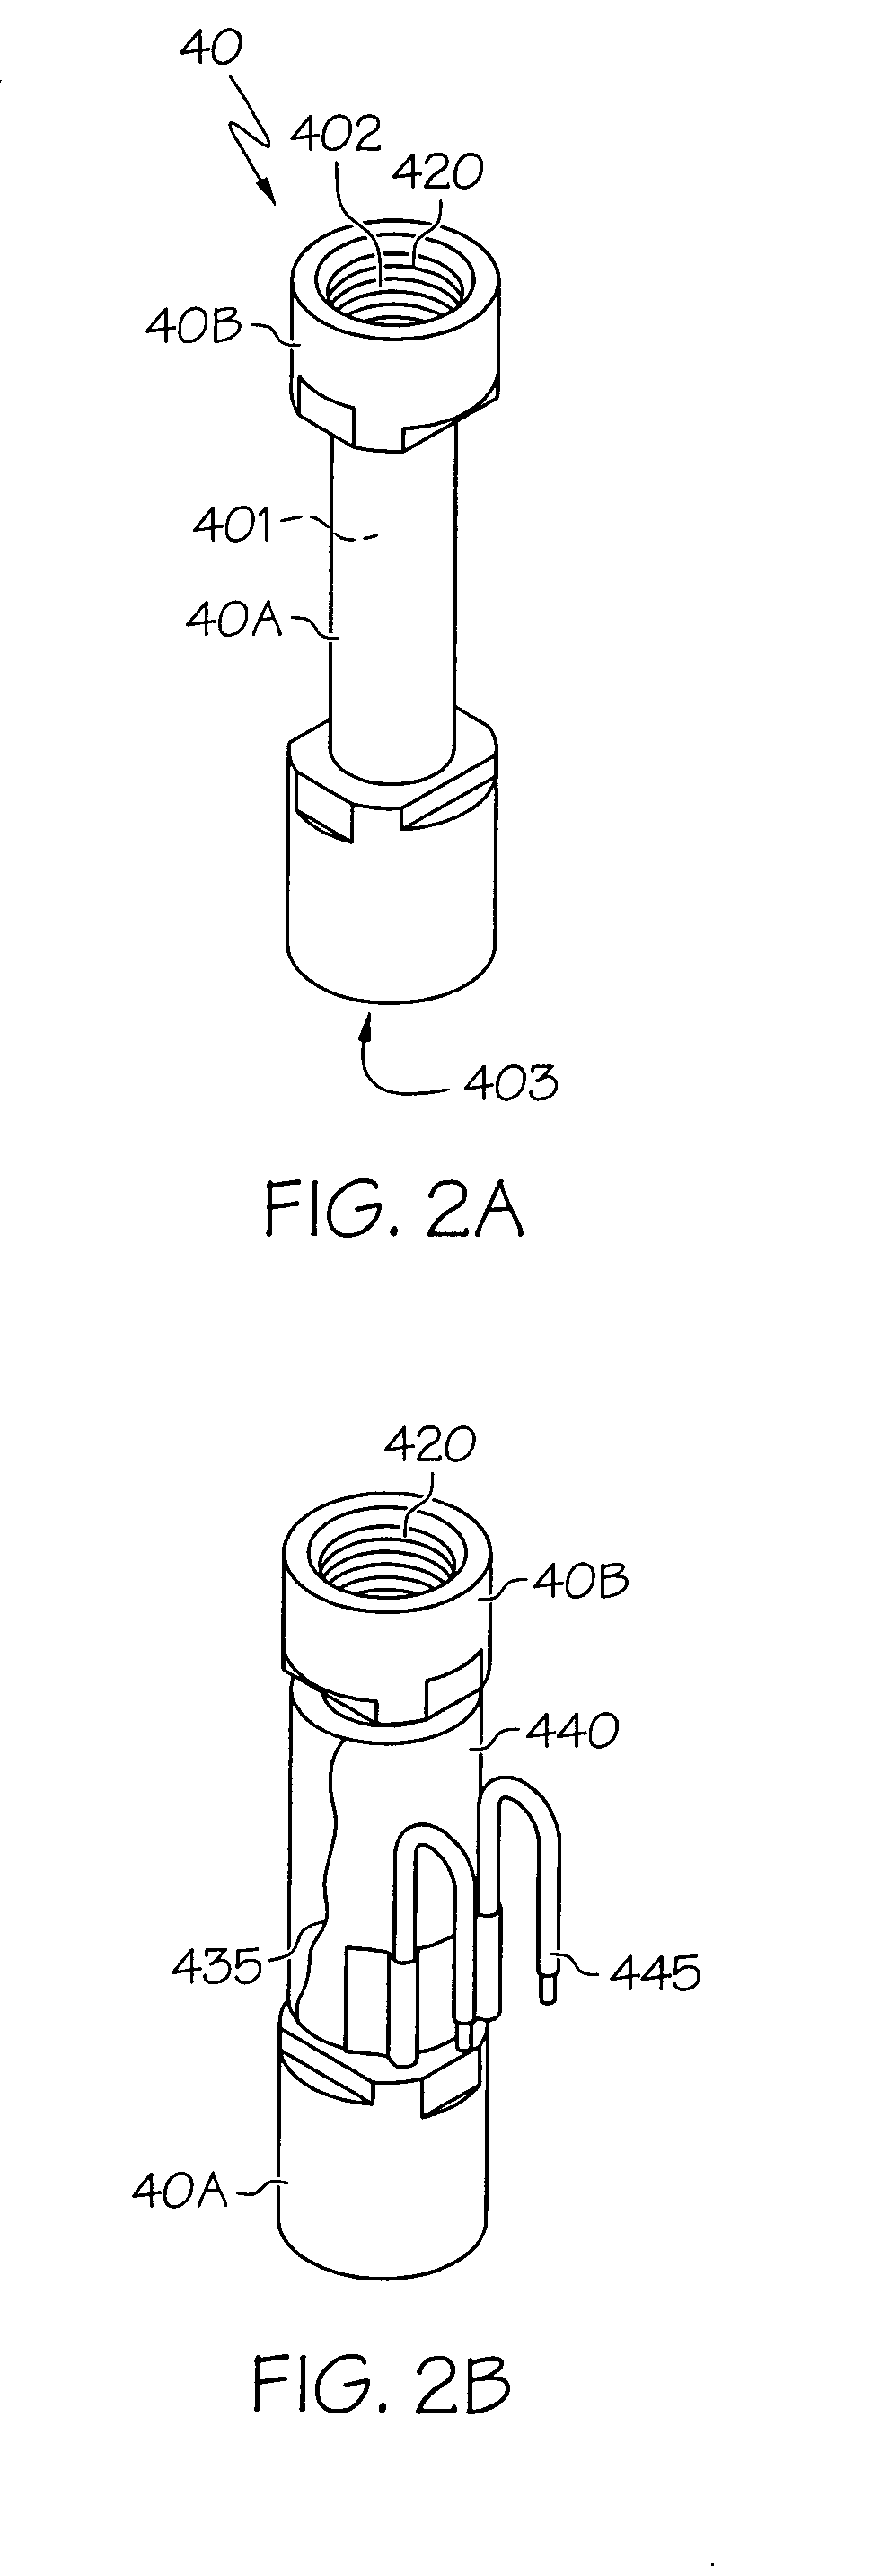 Solenoid-operated fluid valve and assembly incorporating same